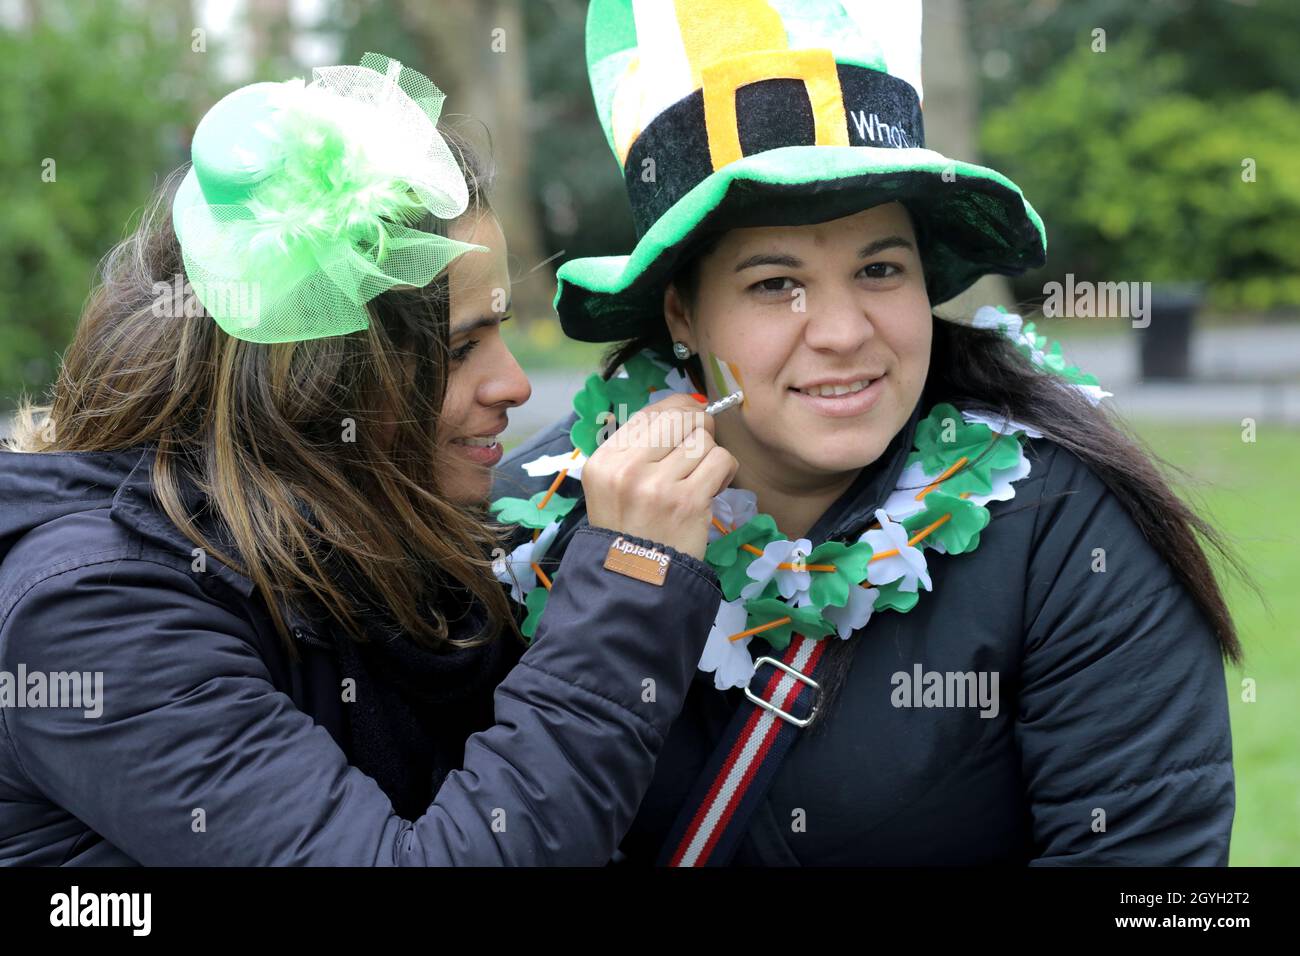 St patrick's Day in Dublin and a sea of green takes over the city on Ireland's national holiday. Stock Photo